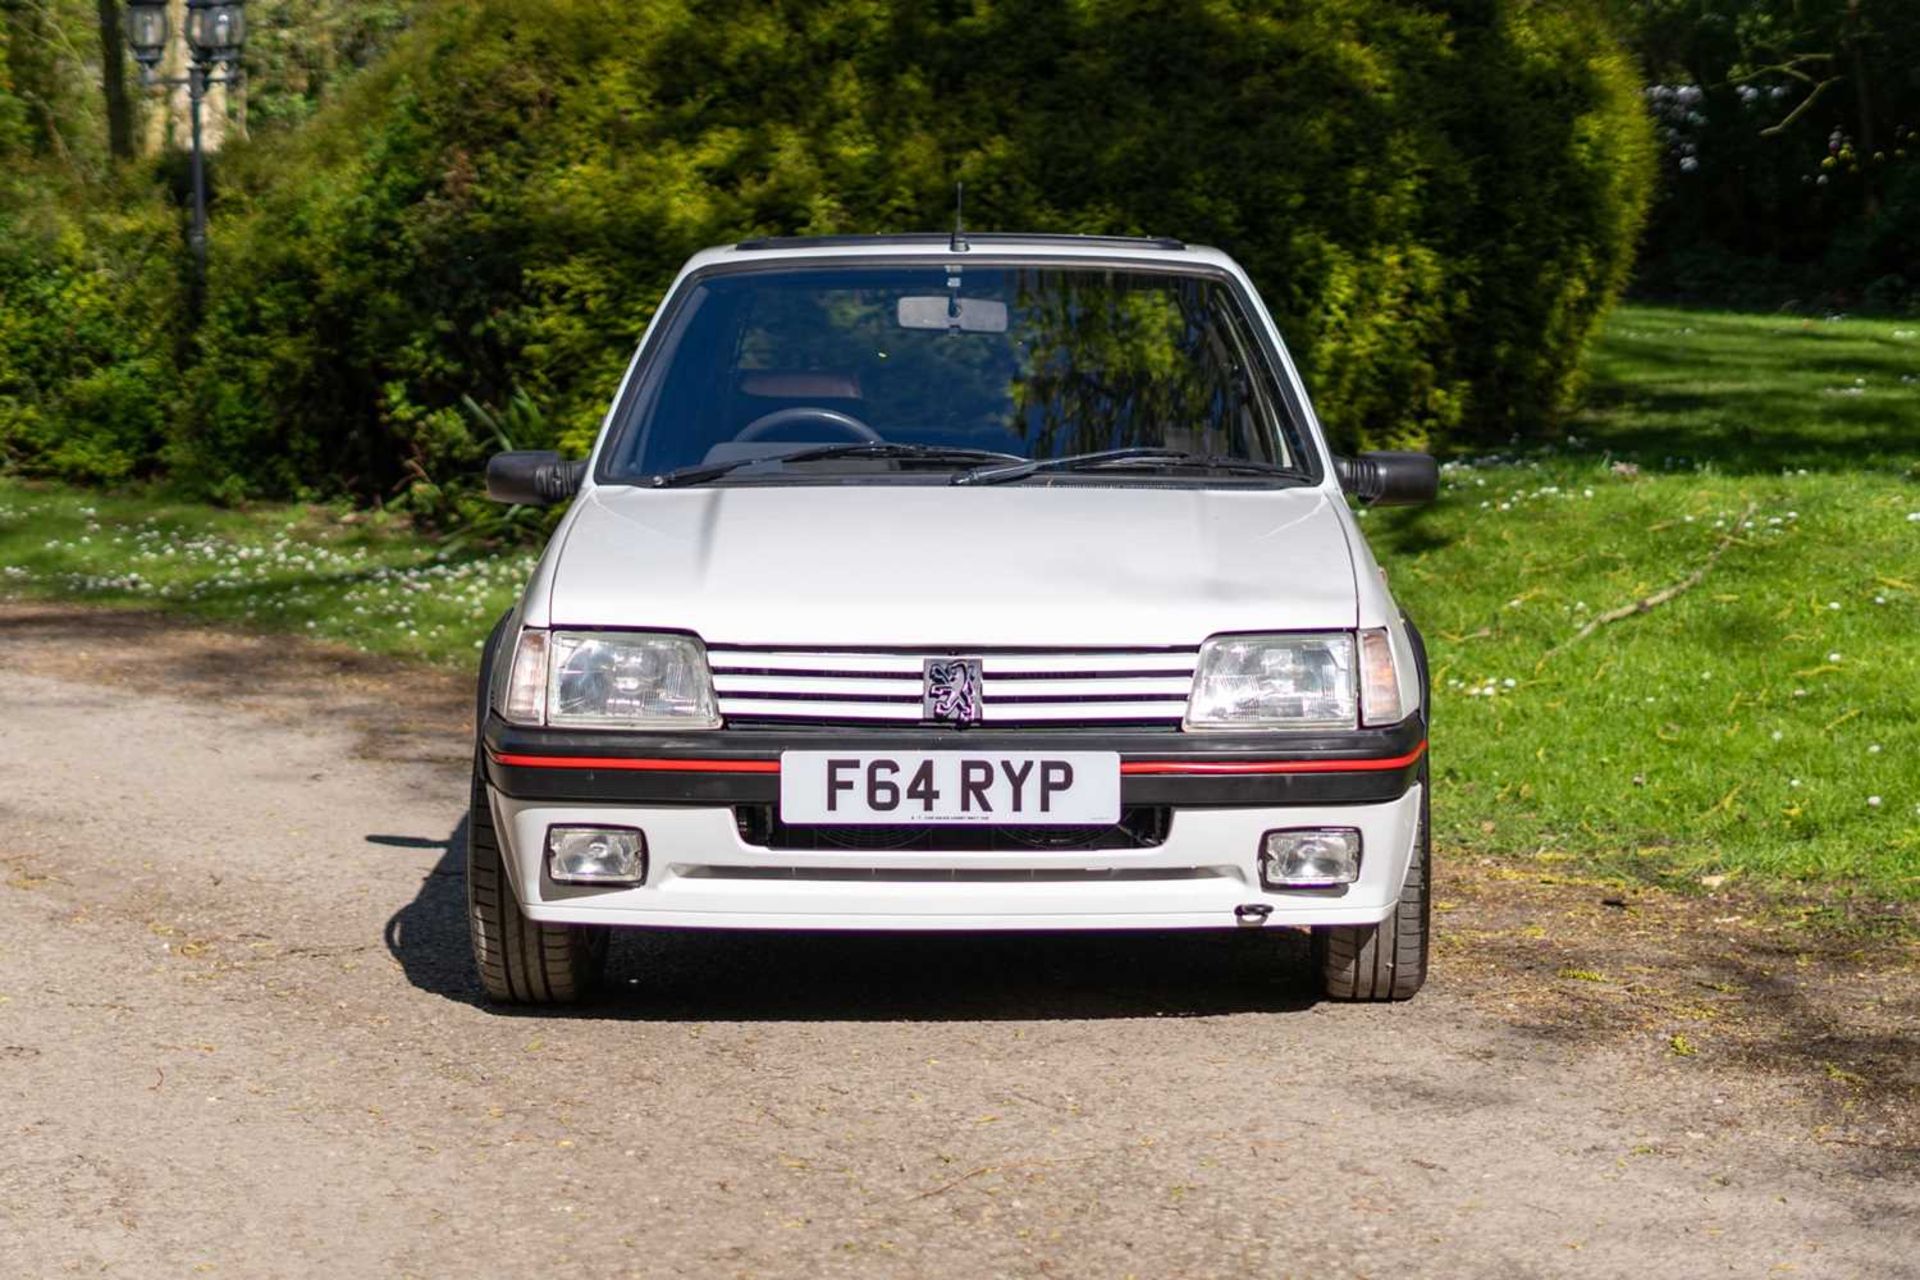 1989 Peugeot 205 GTi 1.6 The subject of much recent expenditure *** NO RESERVE *** - Image 2 of 59